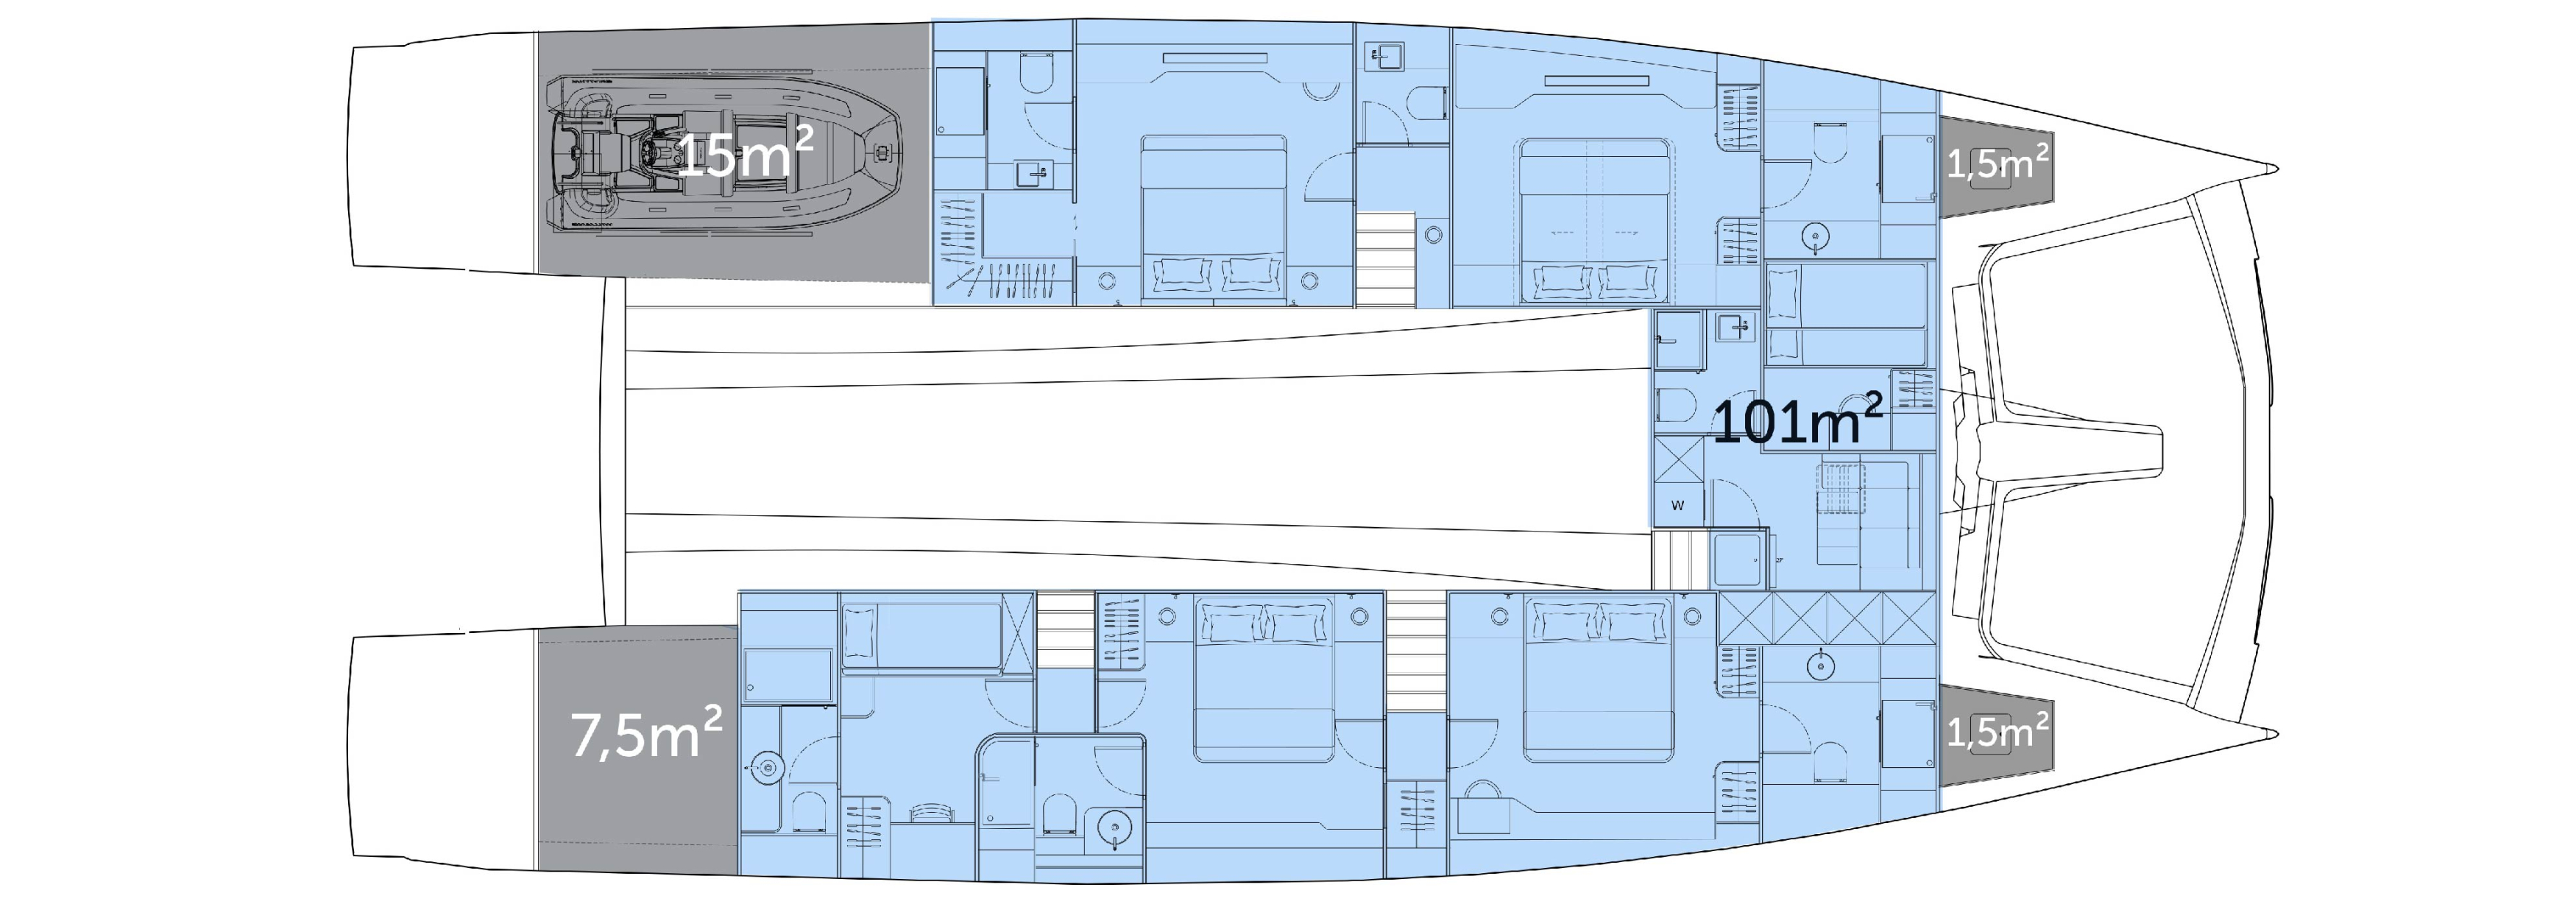 Silent 80 yacht 6 cabins lower deck area plan